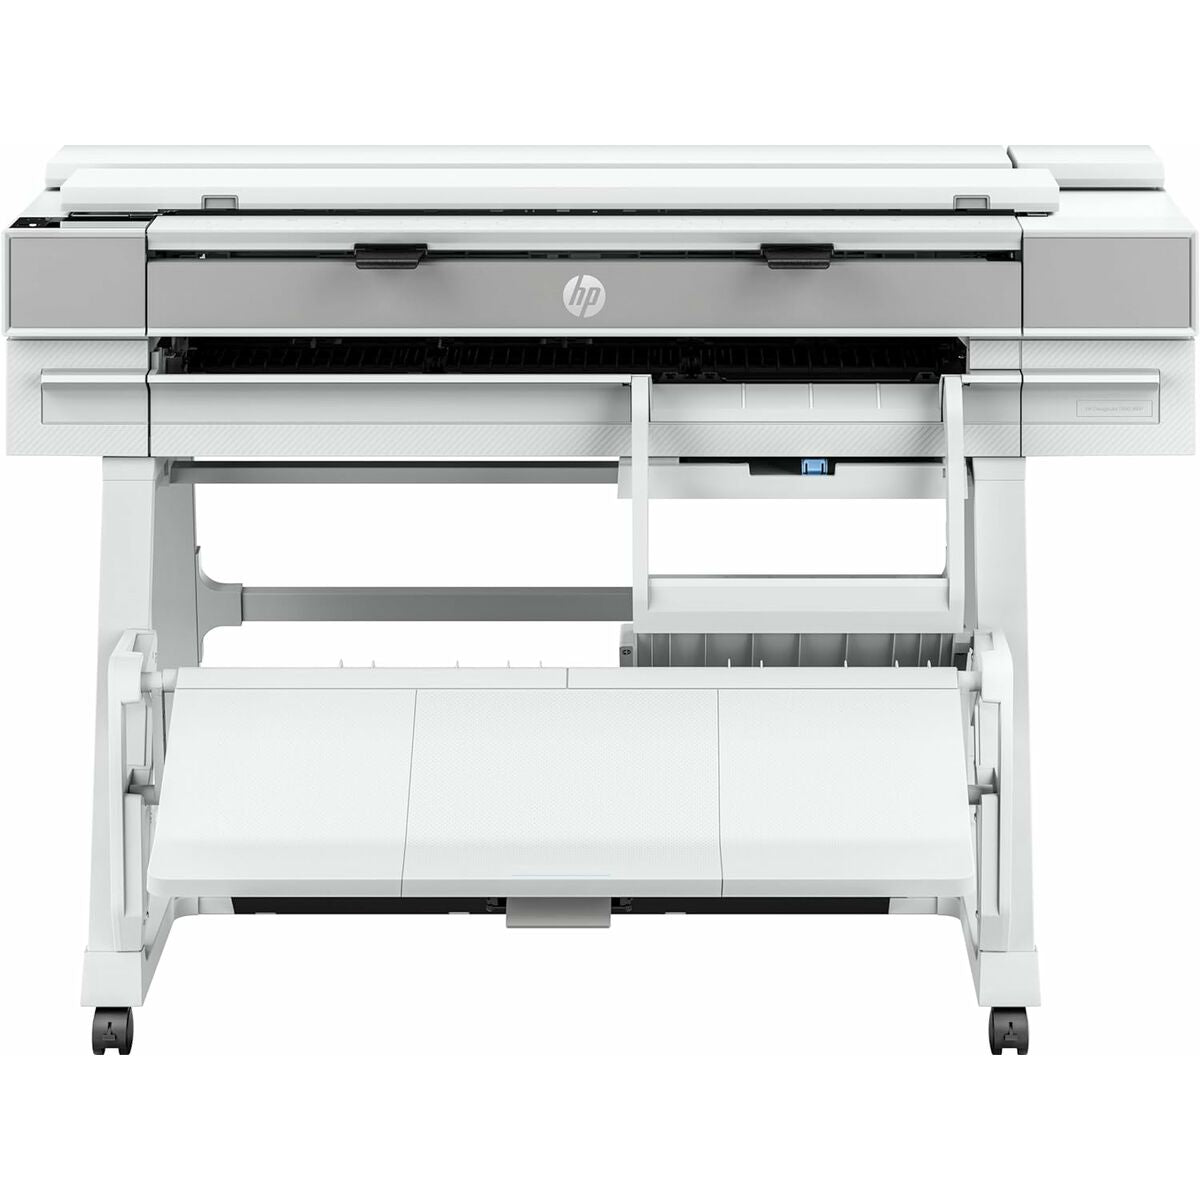 Printer HP DesignJet T950 MFP, HP, Computing, Printers and accessories, printer-hp-designjet-t950-mfp, Brand_HP, category-reference-2609, category-reference-2642, category-reference-2645, category-reference-t-19685, category-reference-t-19911, category-reference-t-21378, category-reference-t-25693, computers / peripherals, Condition_NEW, office, Price_+ 1000, Teleworking, RiotNook